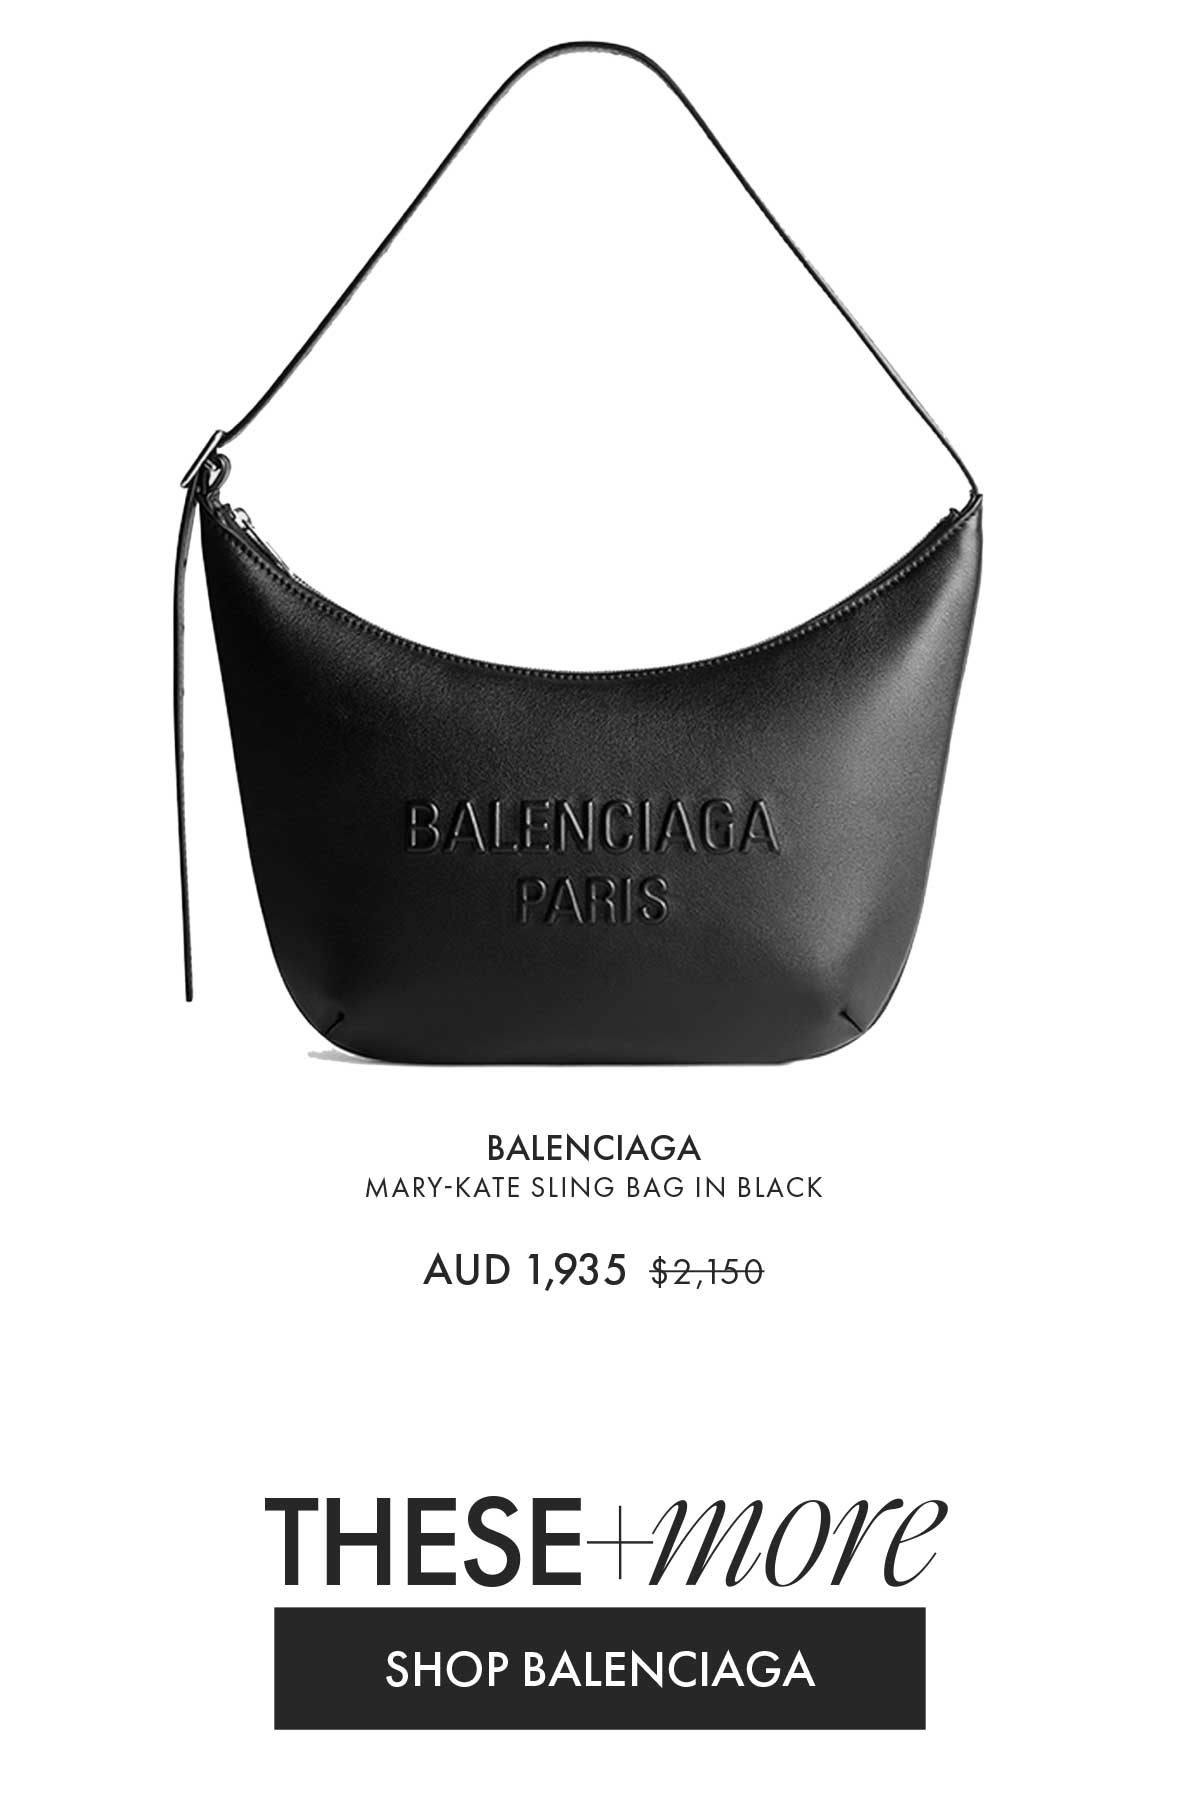 Balenciaga revolutionised womens fashion providing an alternative to clothes that accentuated the hourglass figure